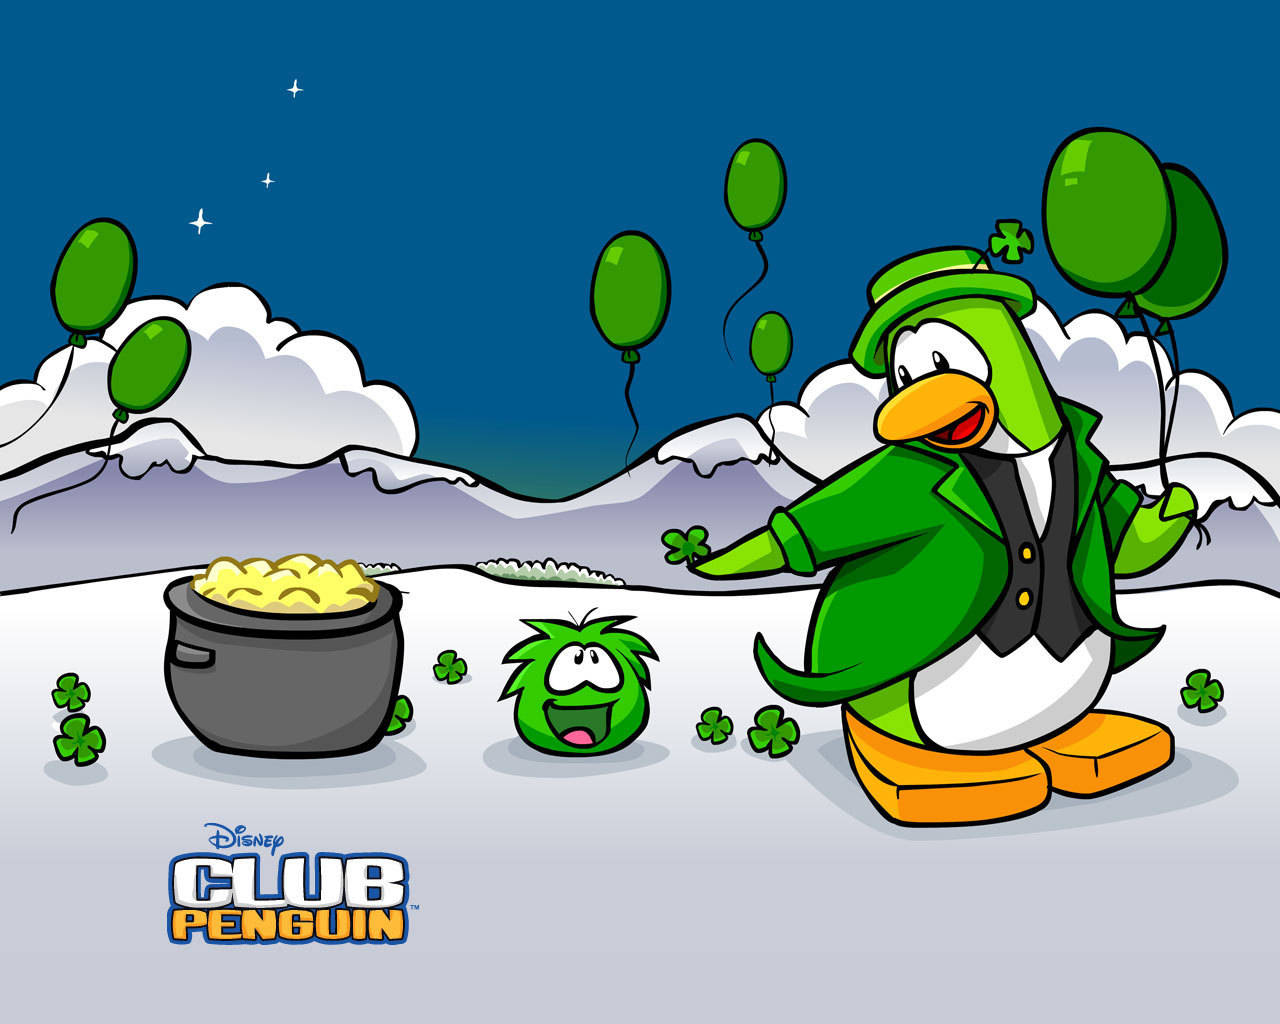 Club Penguin Poster With Green Balloons Wallpaper